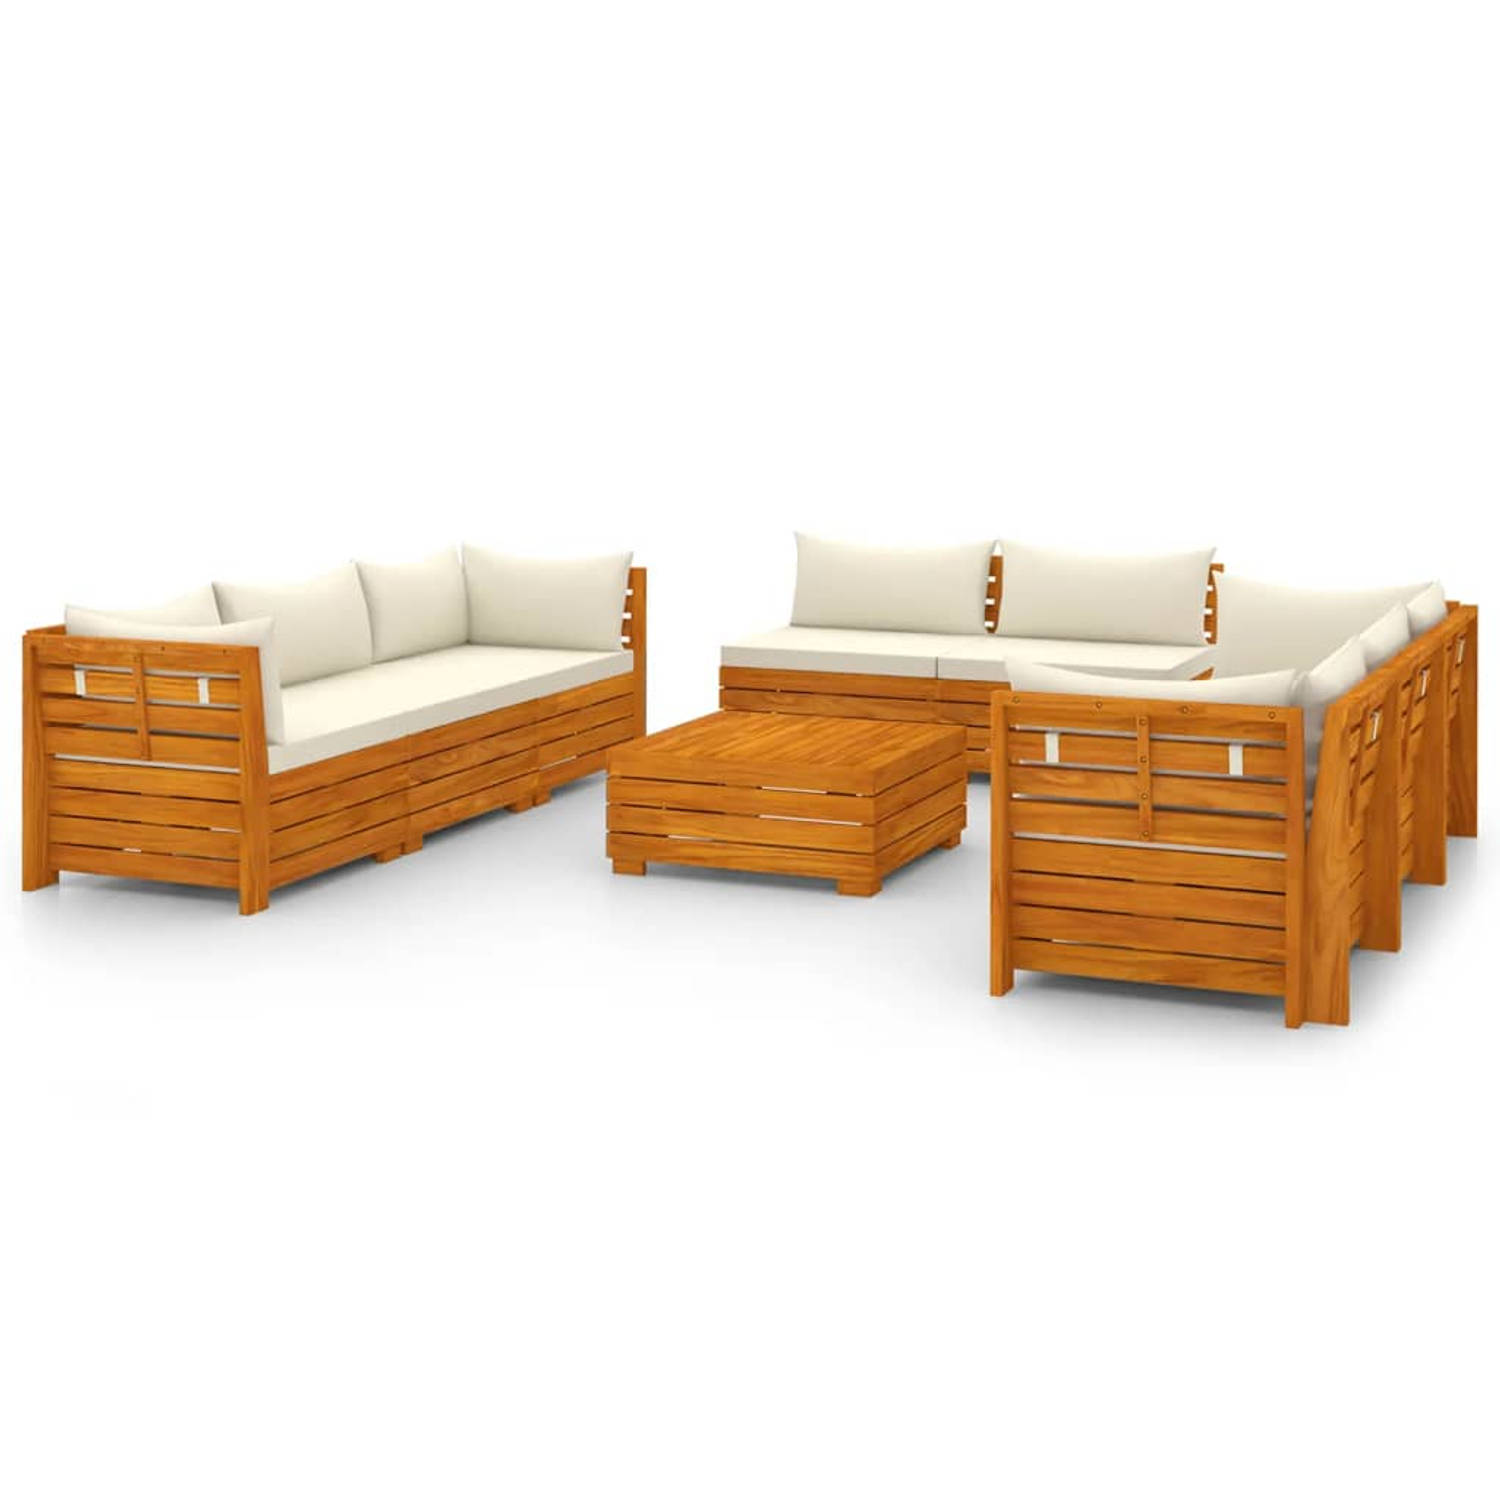 The Living Store 9-delige Loungeset met kussens massief acaciahout - Tuinset